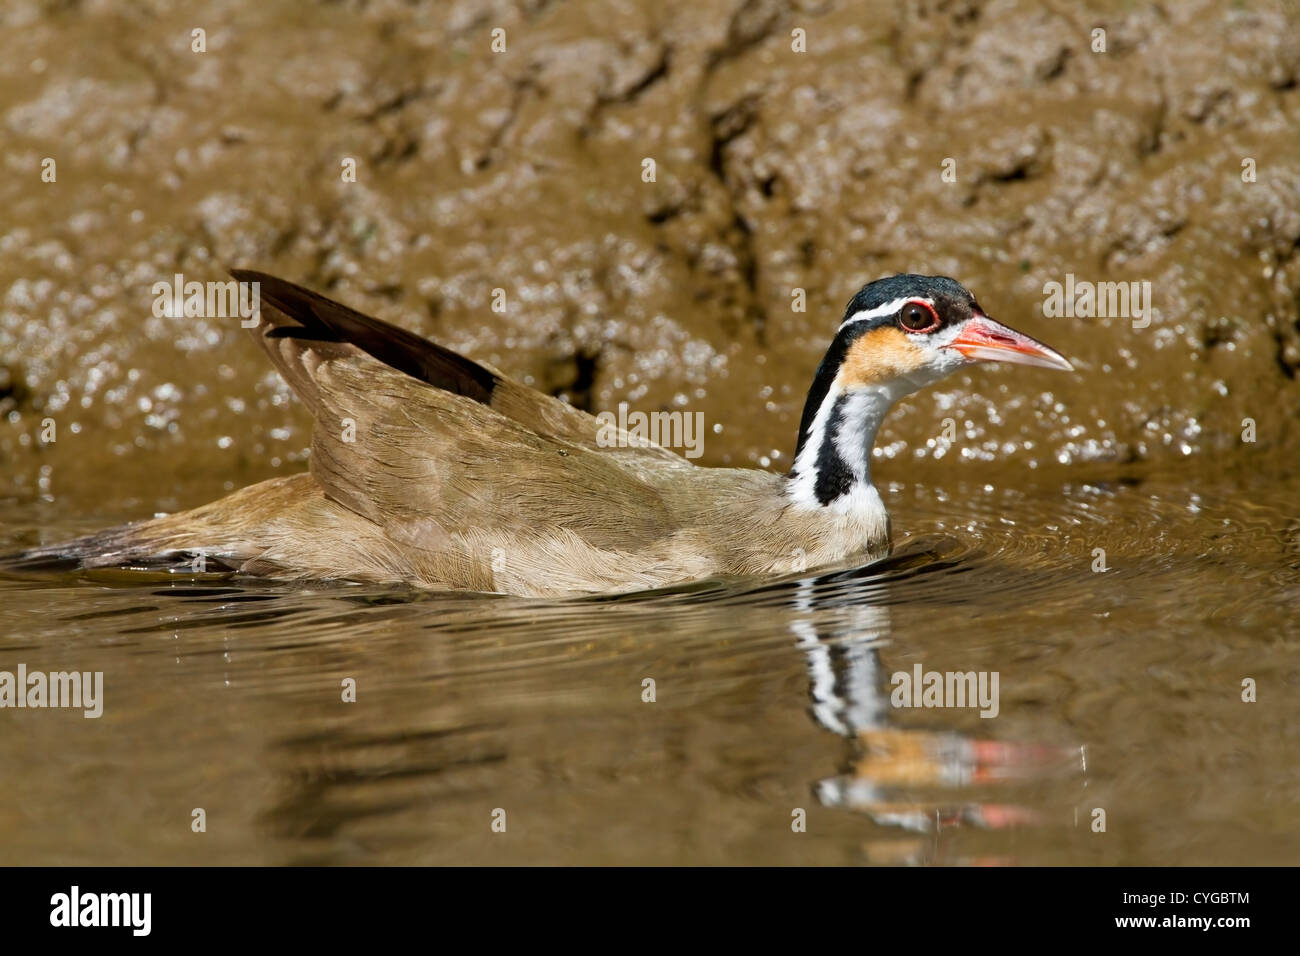 sungrebe (Heliornis fulica) adult swimming on water on river, Costa Rica, central America Stock Photo